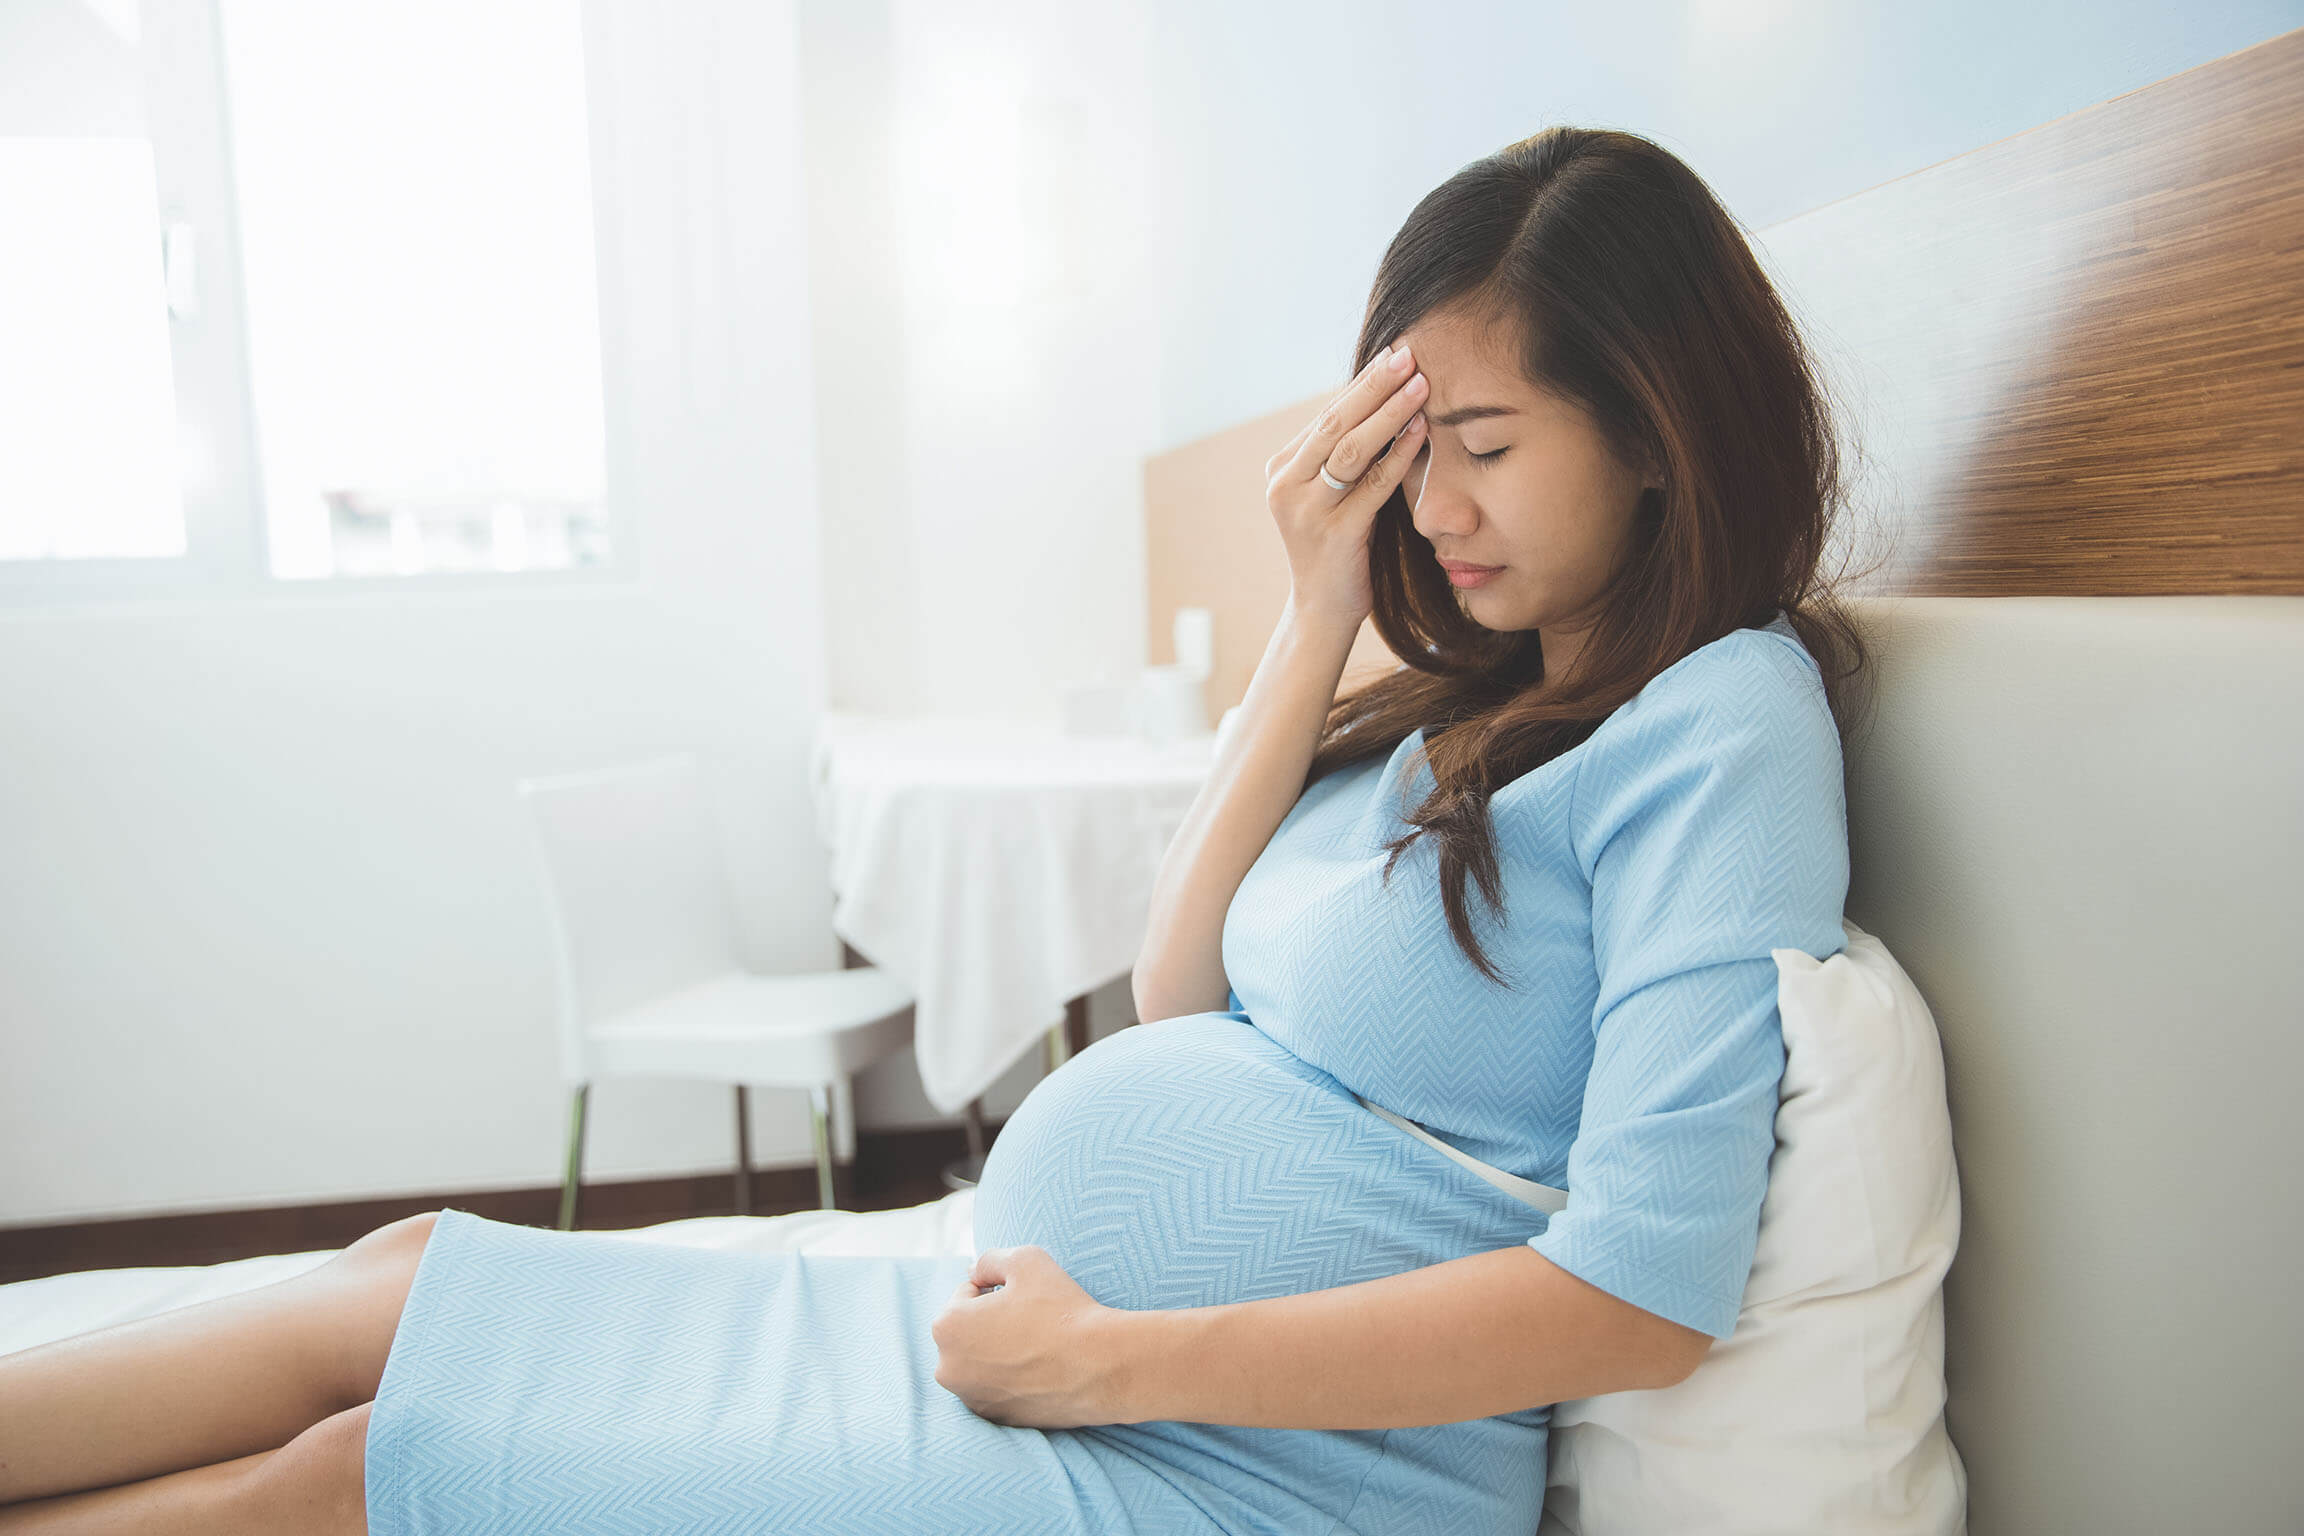 Managing Body Changes and Discomforts During Pregnancy